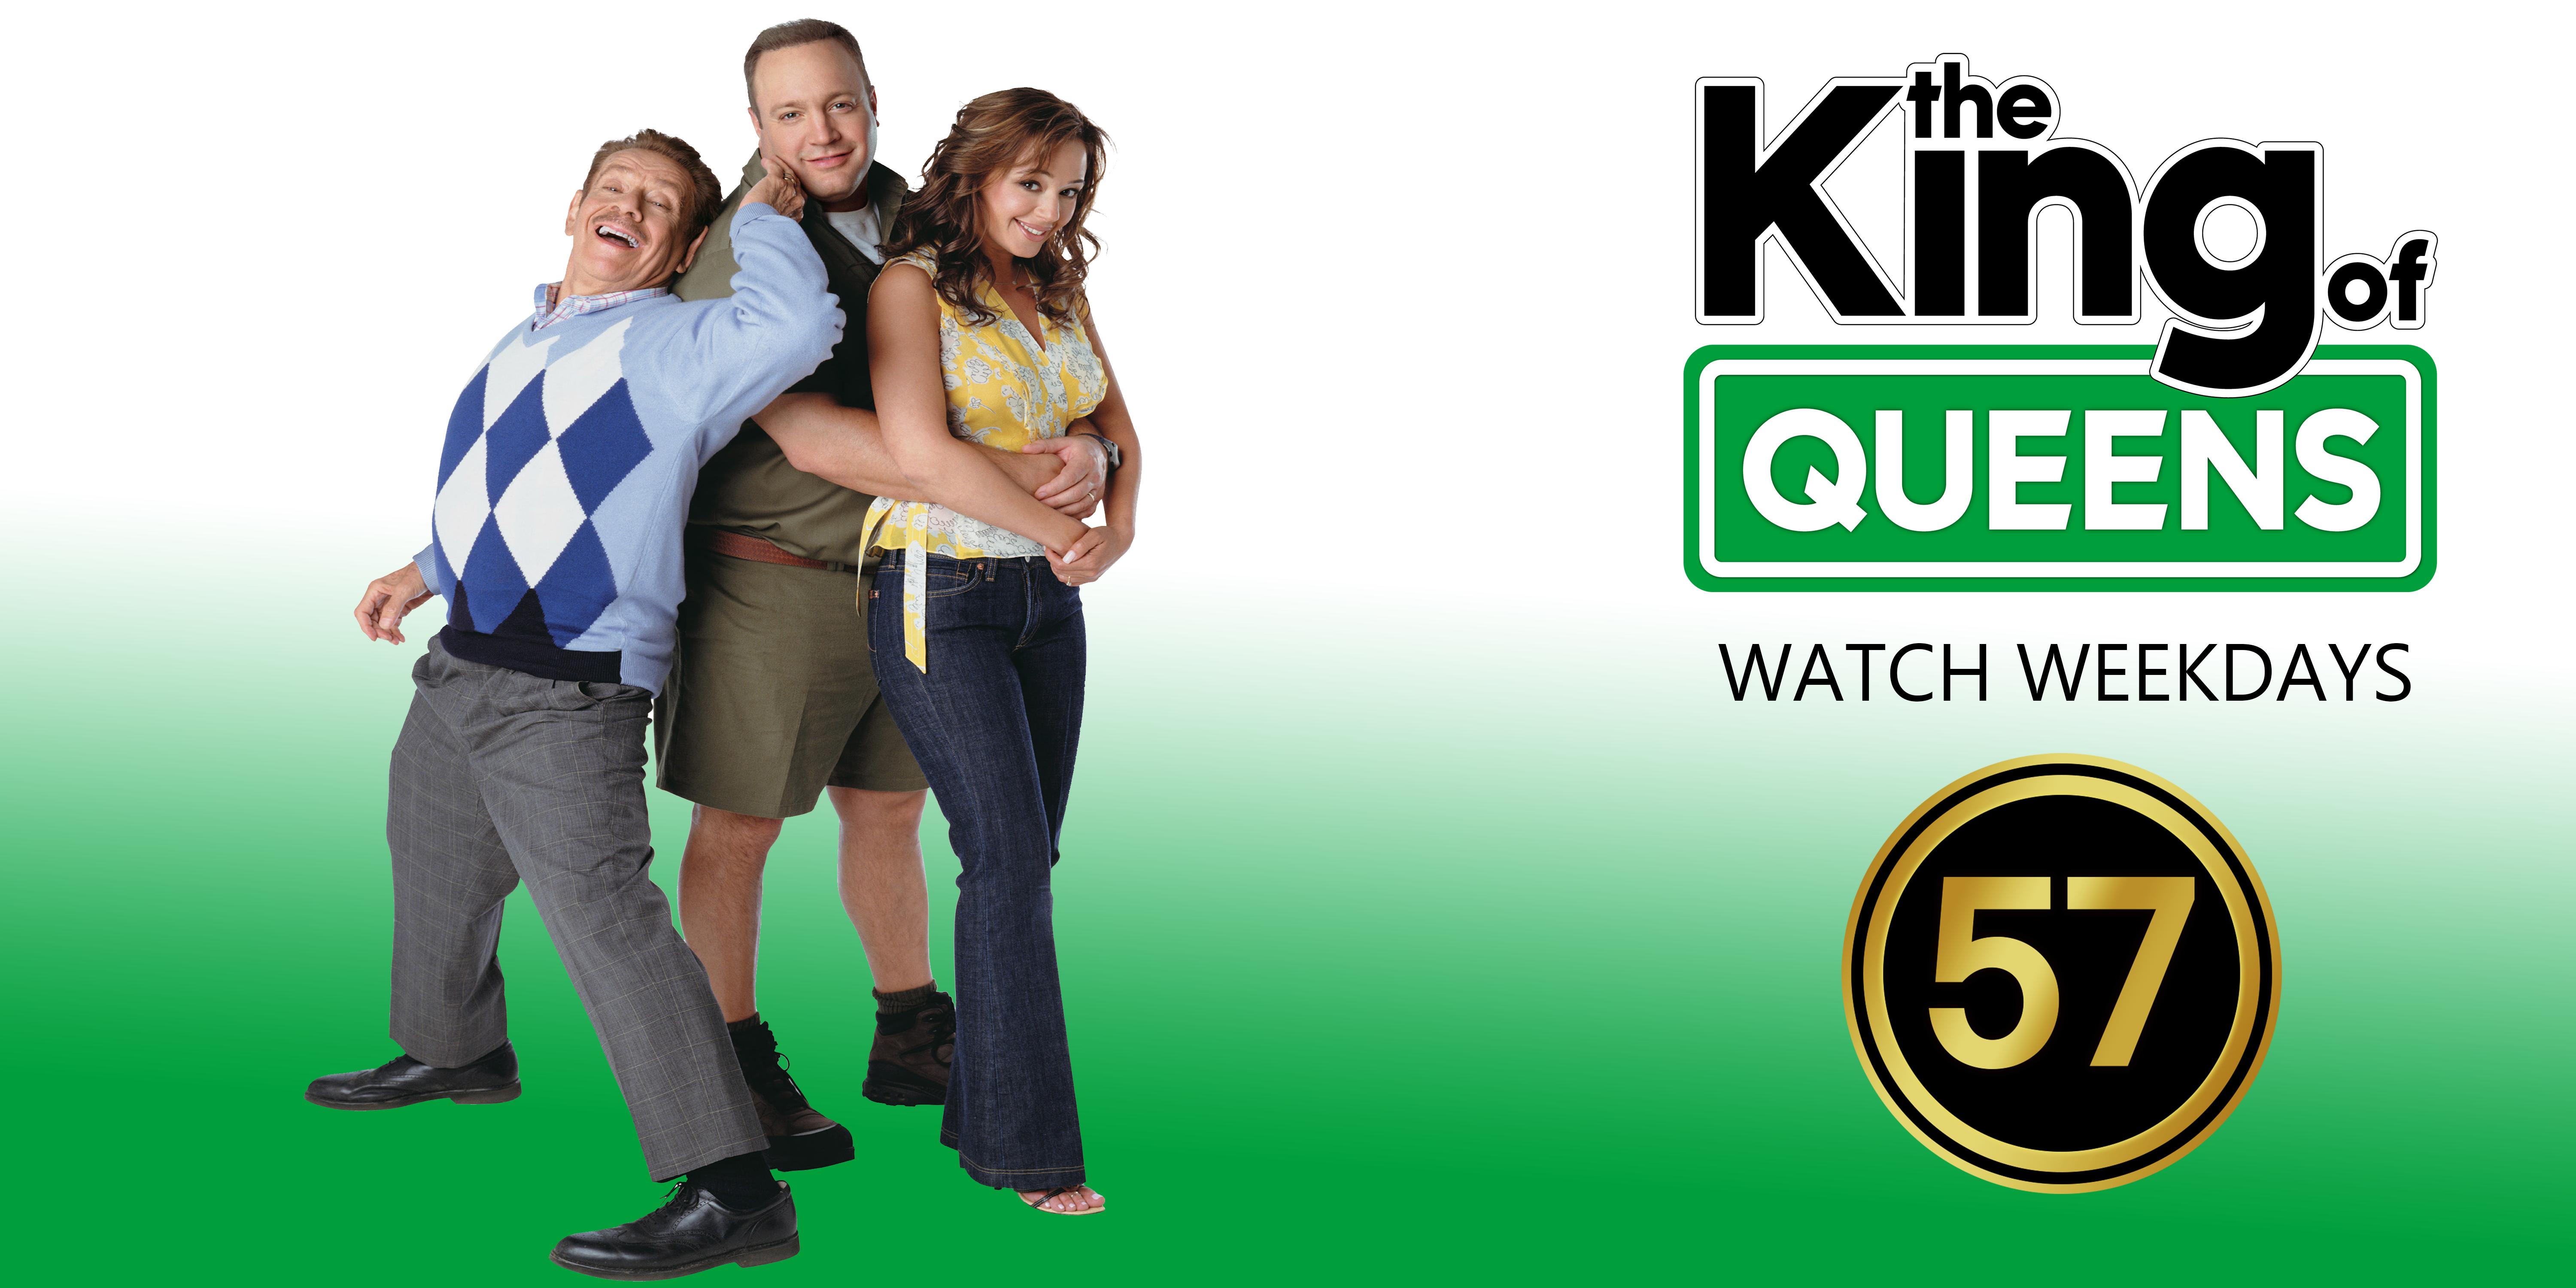 The King of Queens Logo - The King of Queens | WIFS - Wisconsin's 57 Television